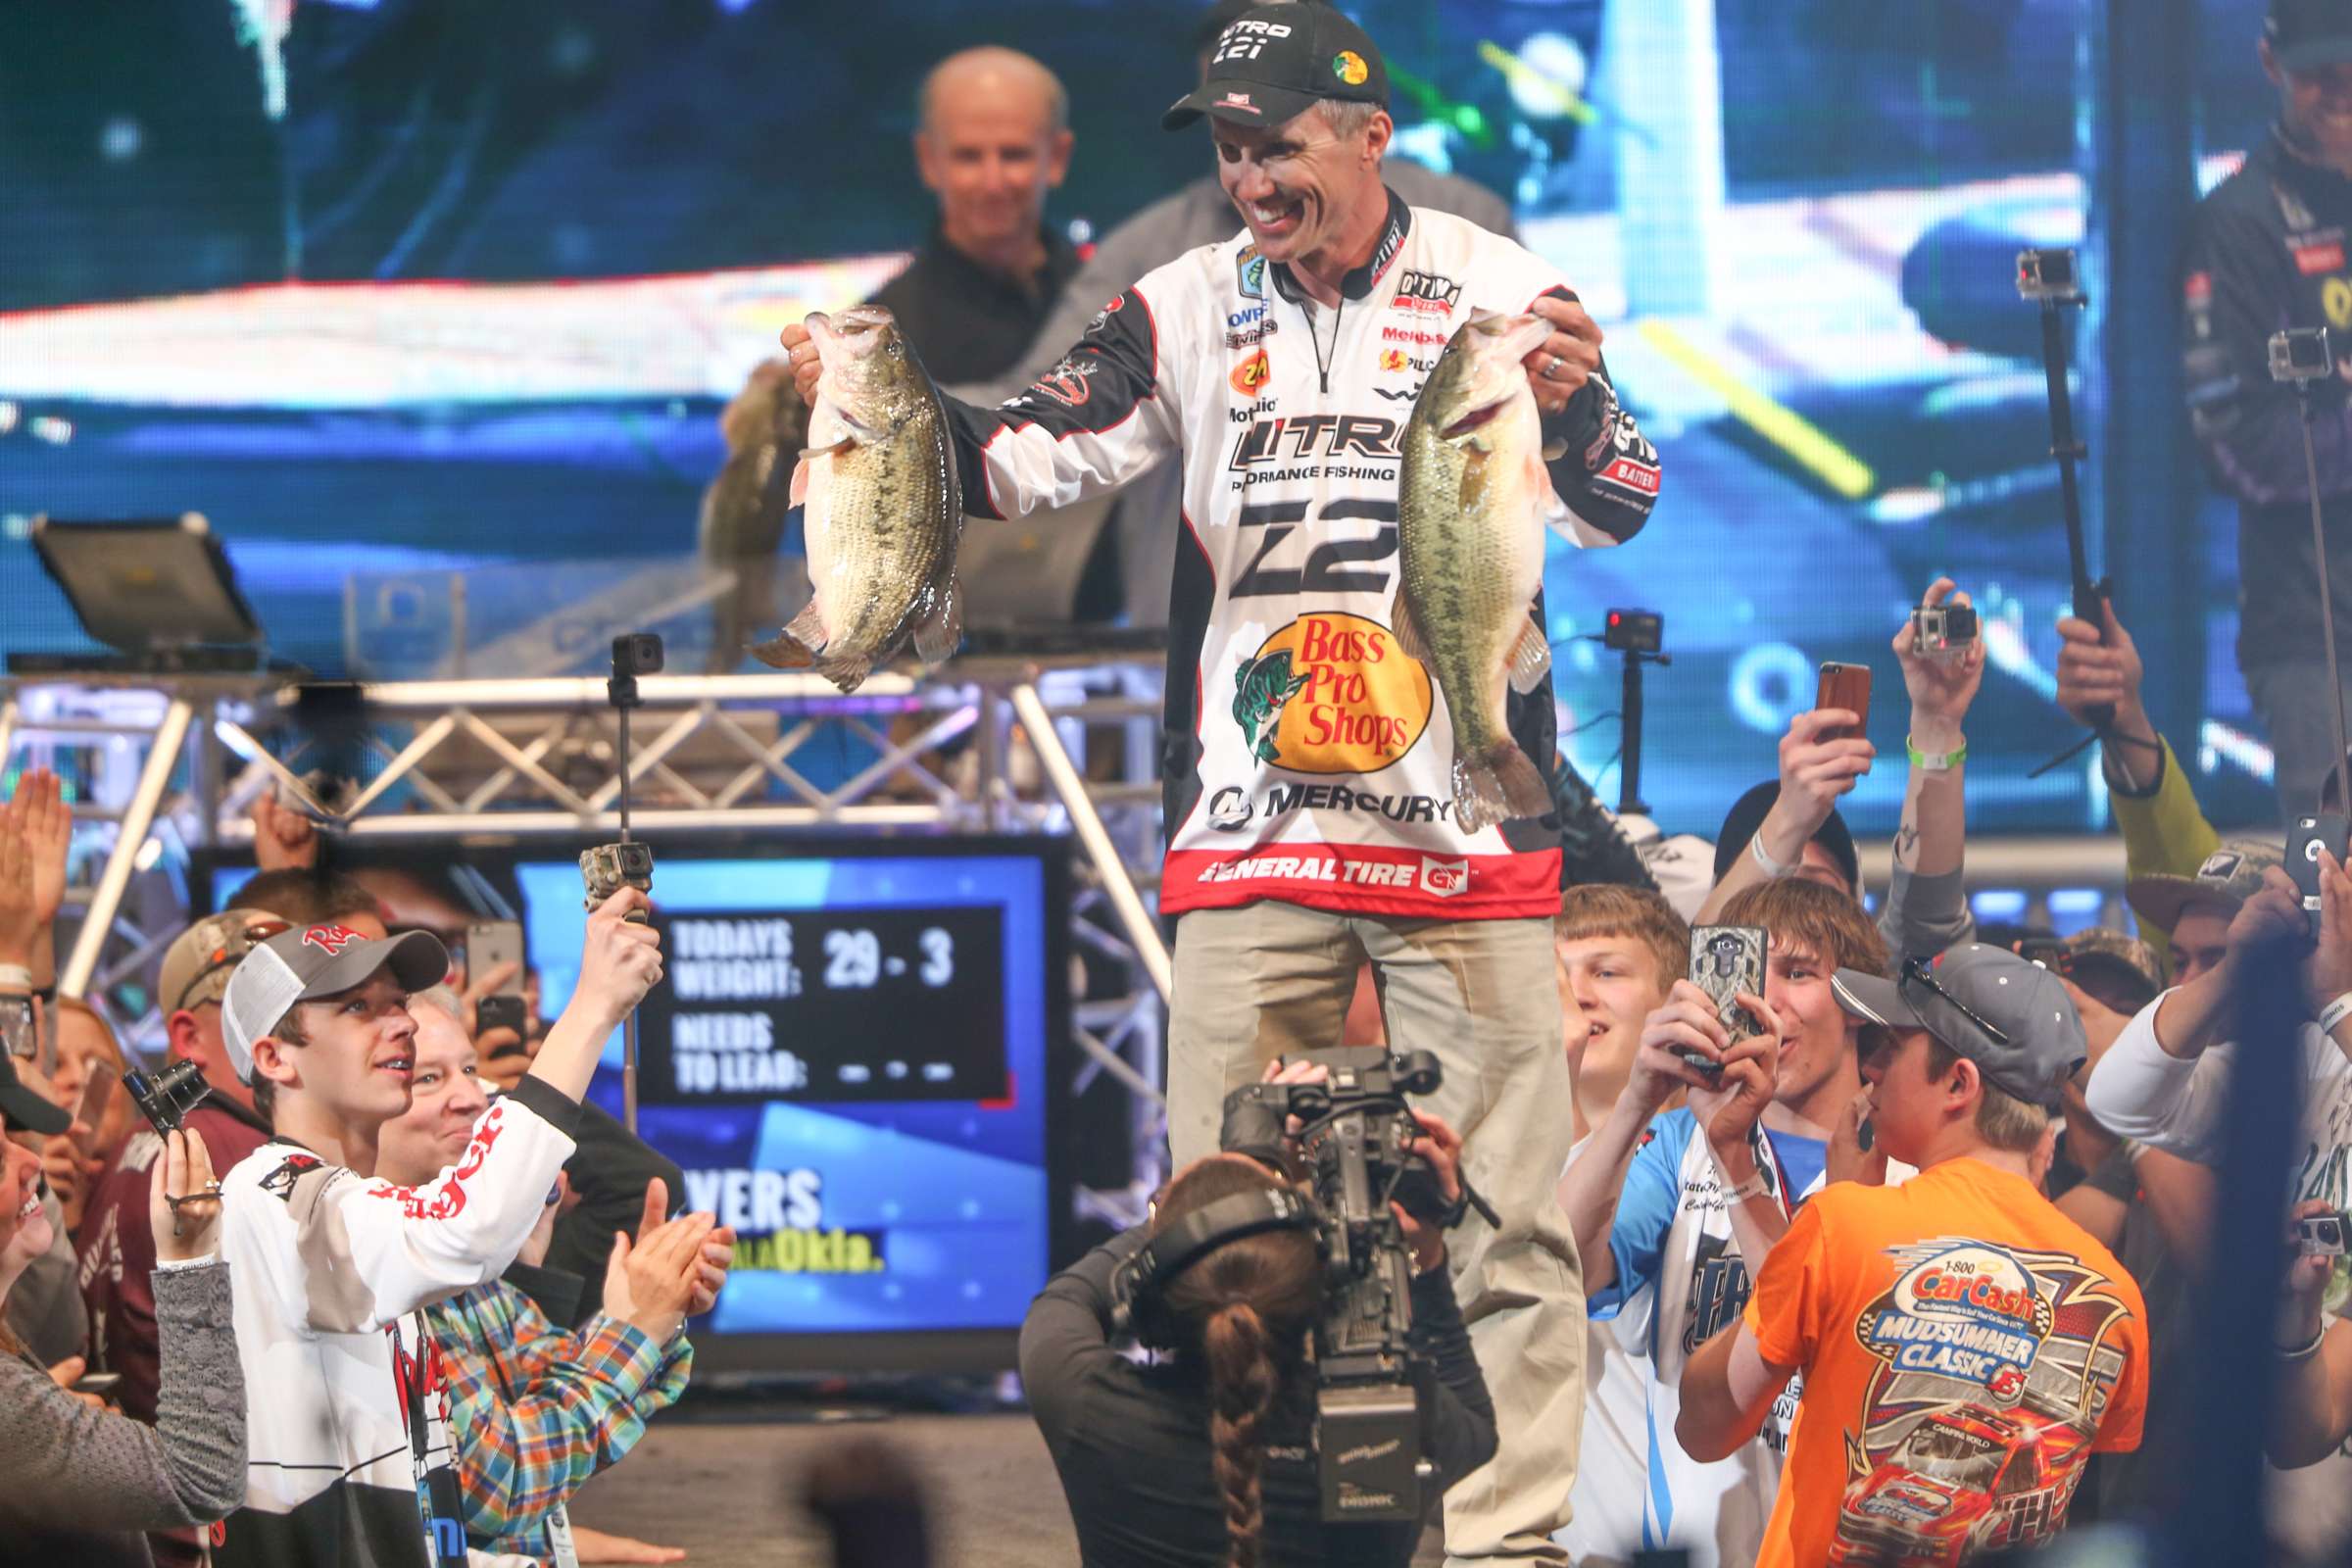 On Saturday, there will be pro seminars and on Sunday the Top 12 fish for the hardware, which Zona believes will go to Classic champ Evers. That would give him two wins in his home state in the same season.